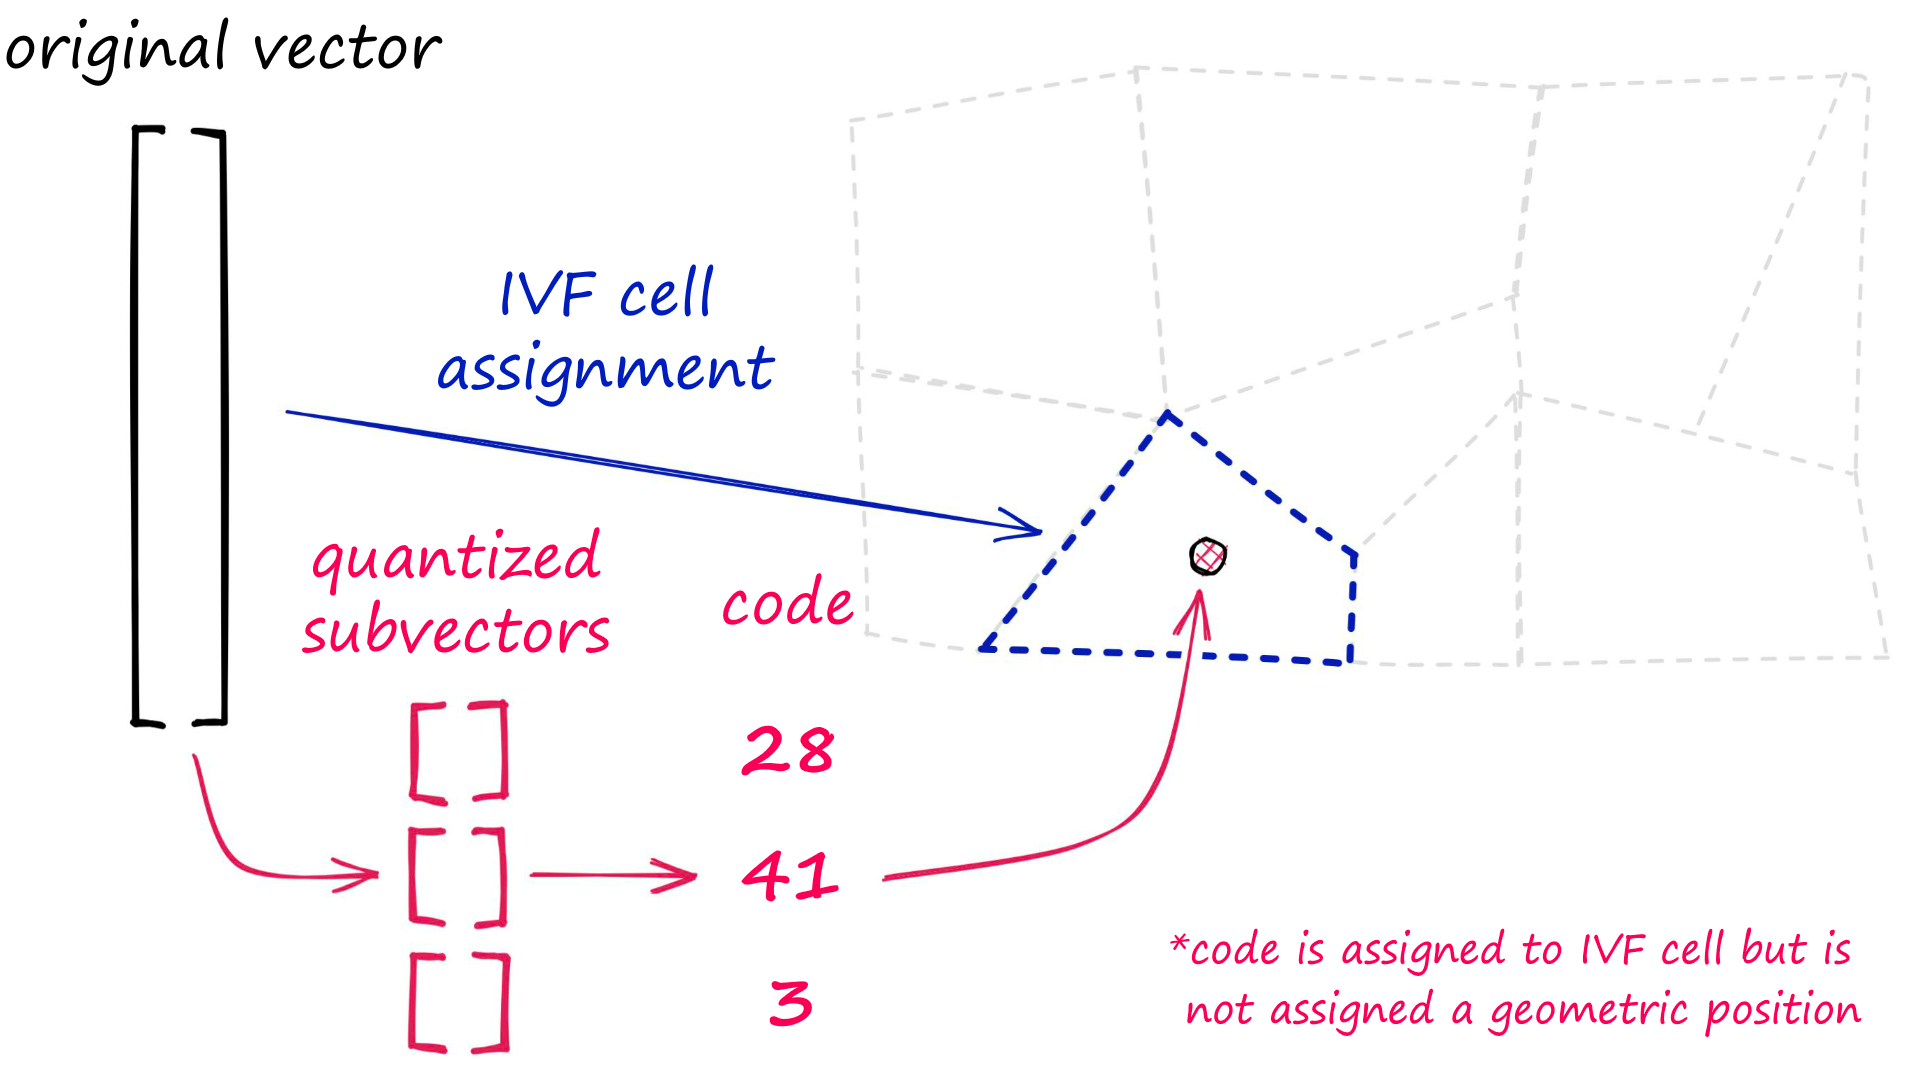 We can merge IVF and PQ indexes to store quantized PQ vectors in an IVF structure.